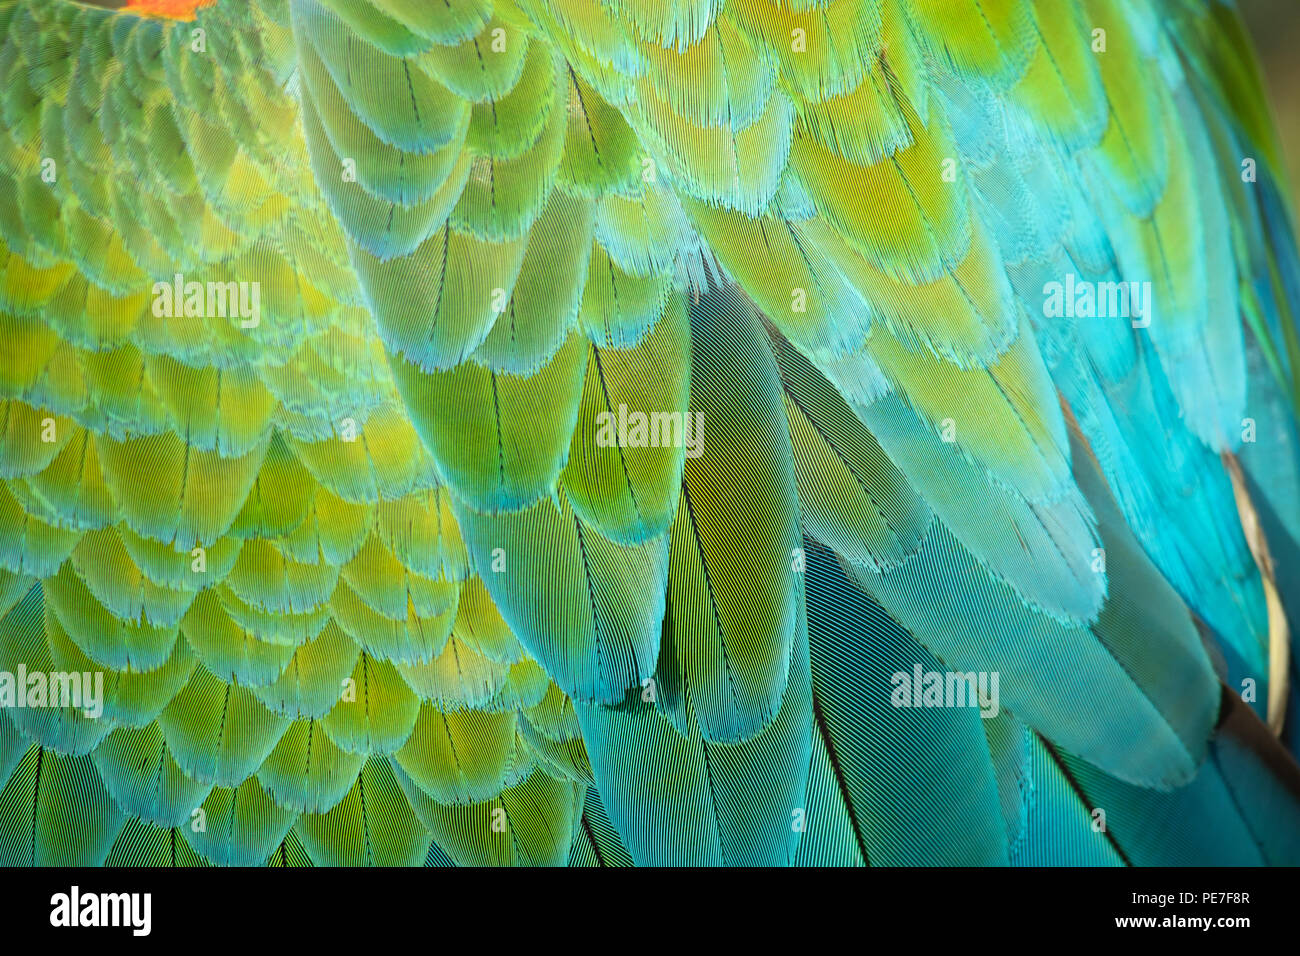 Expensive and exoitic hybrid pet Macaw closeup of feathers Stock Photo